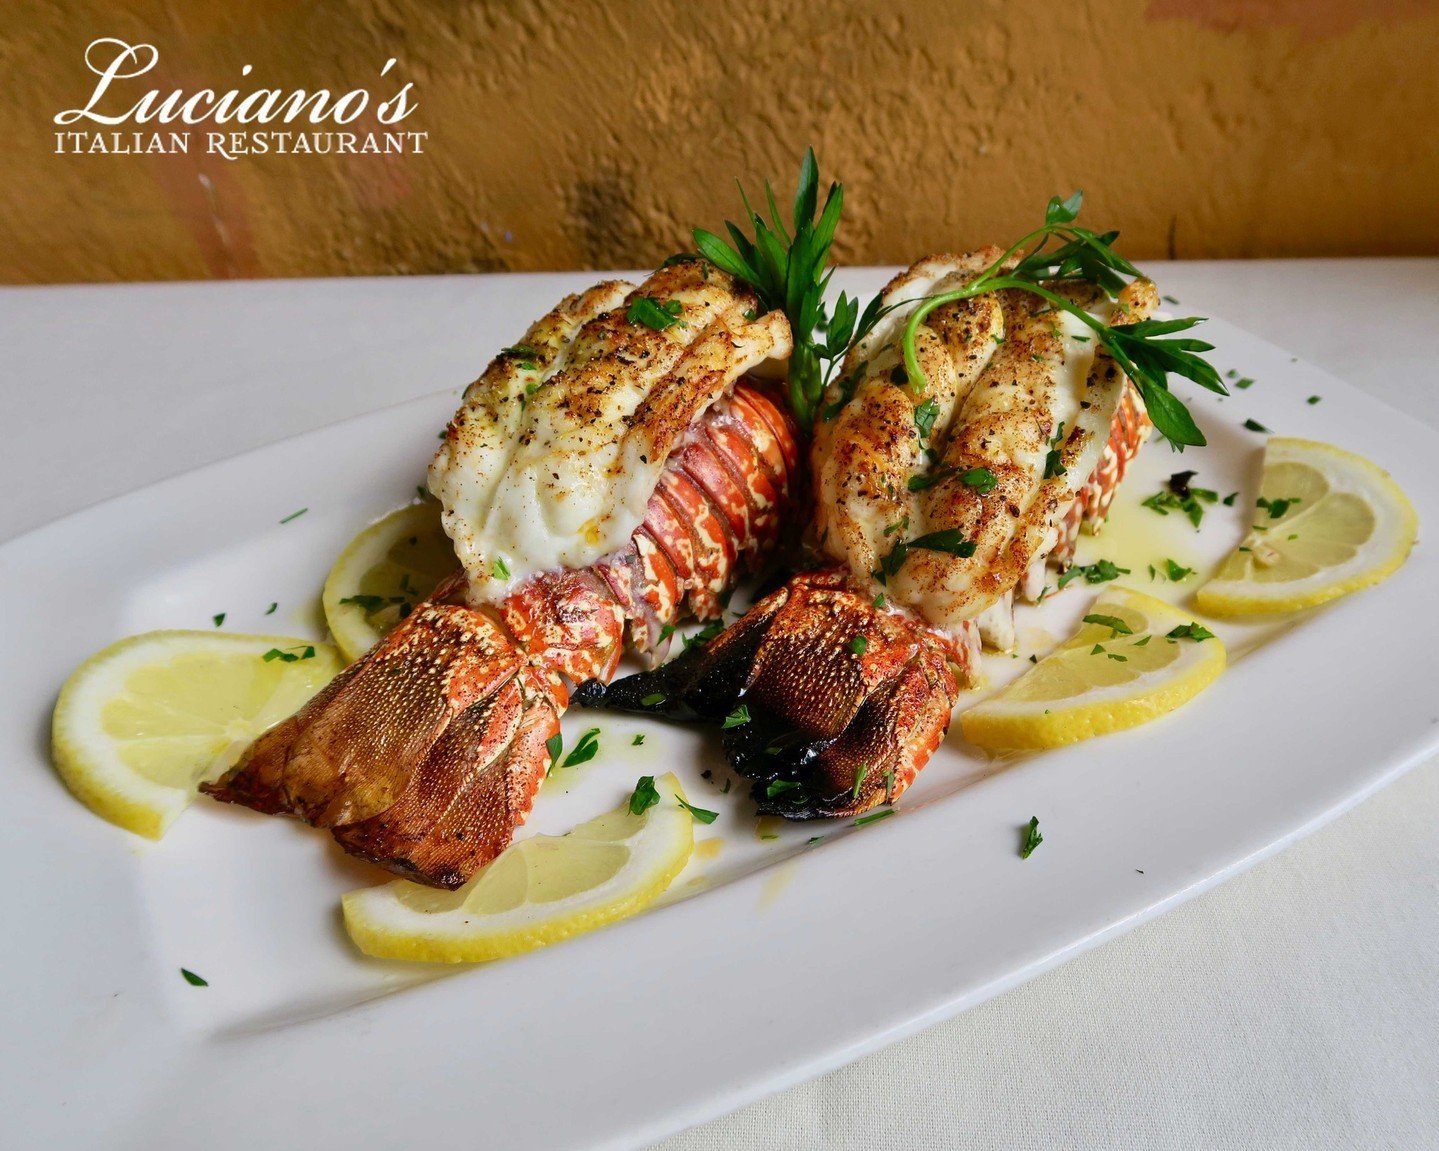 Enjoy Luciano's Twin Lobster Tail special, featuring two succulent 4oz South African lobster tails accompanied by a candle-lit dish of drawn butter.